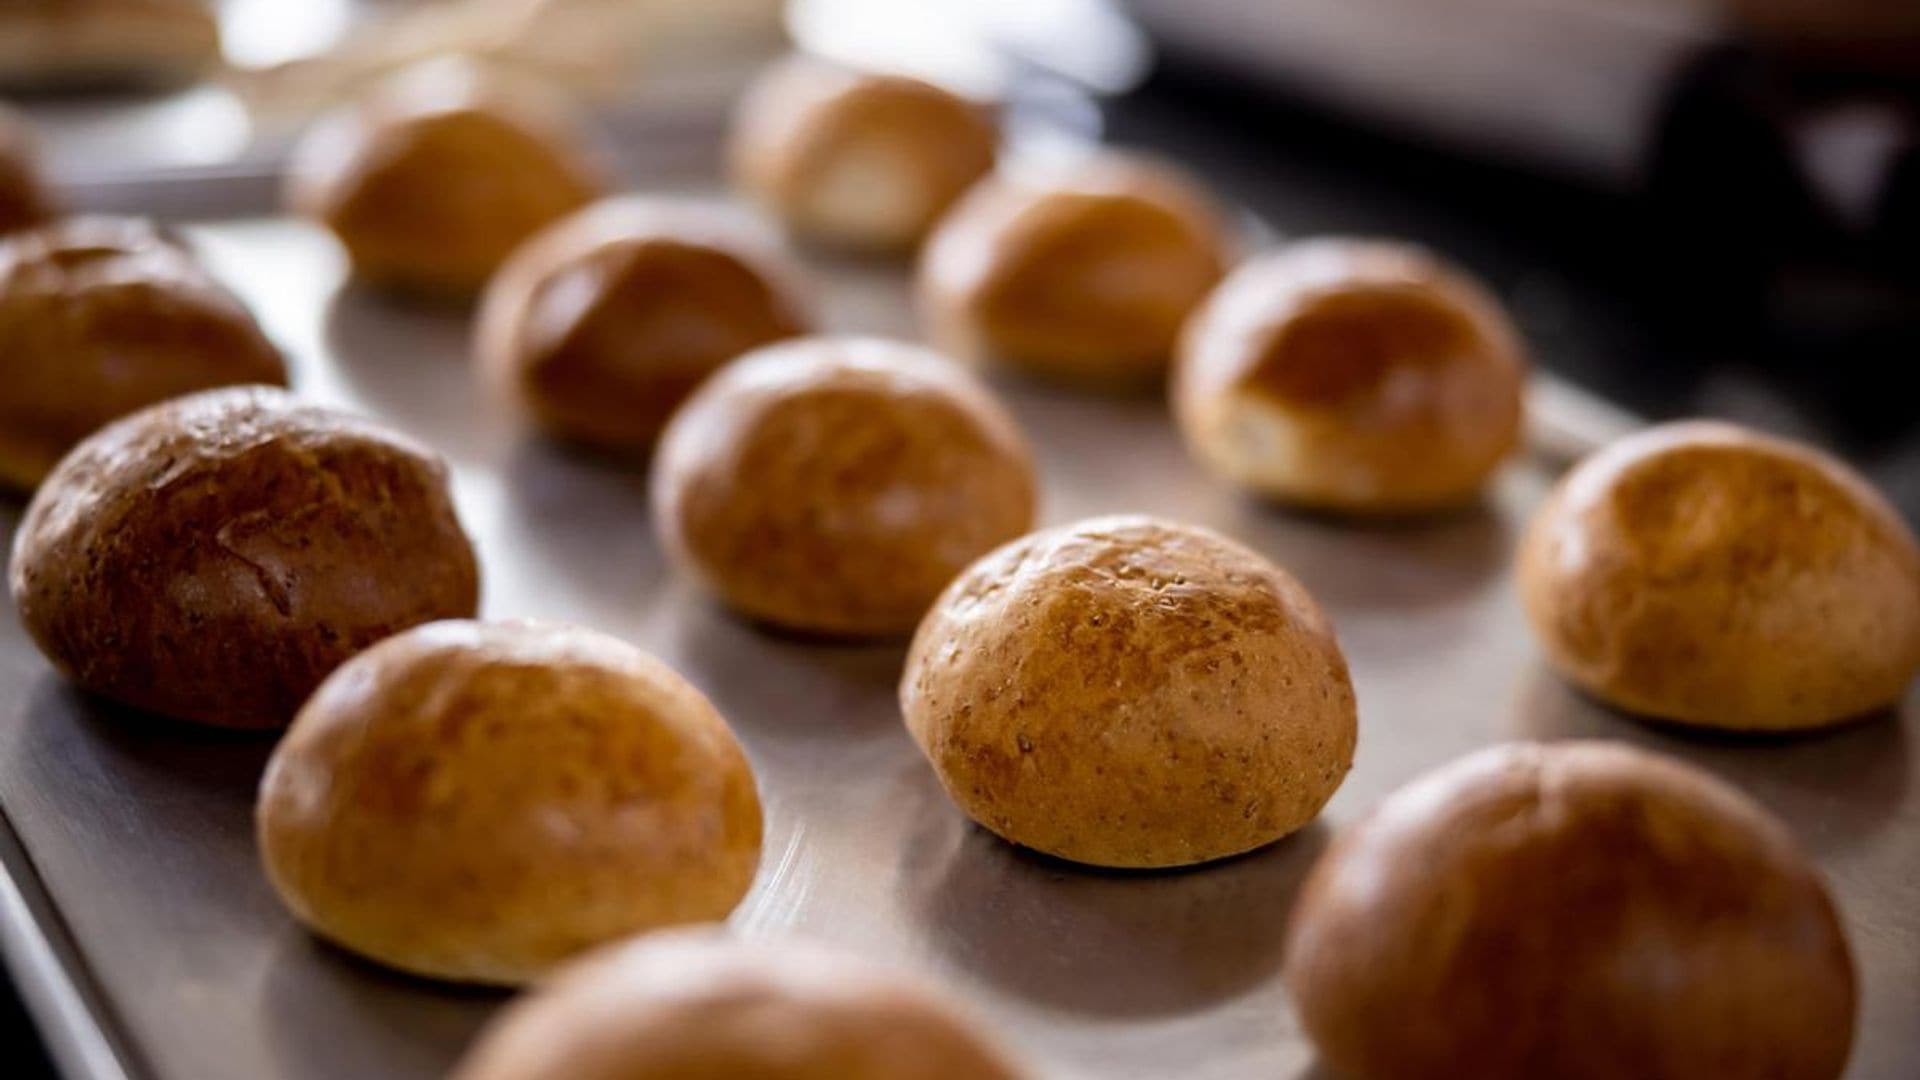 Colombia’s pan de bono was named as the second-best bread in the world